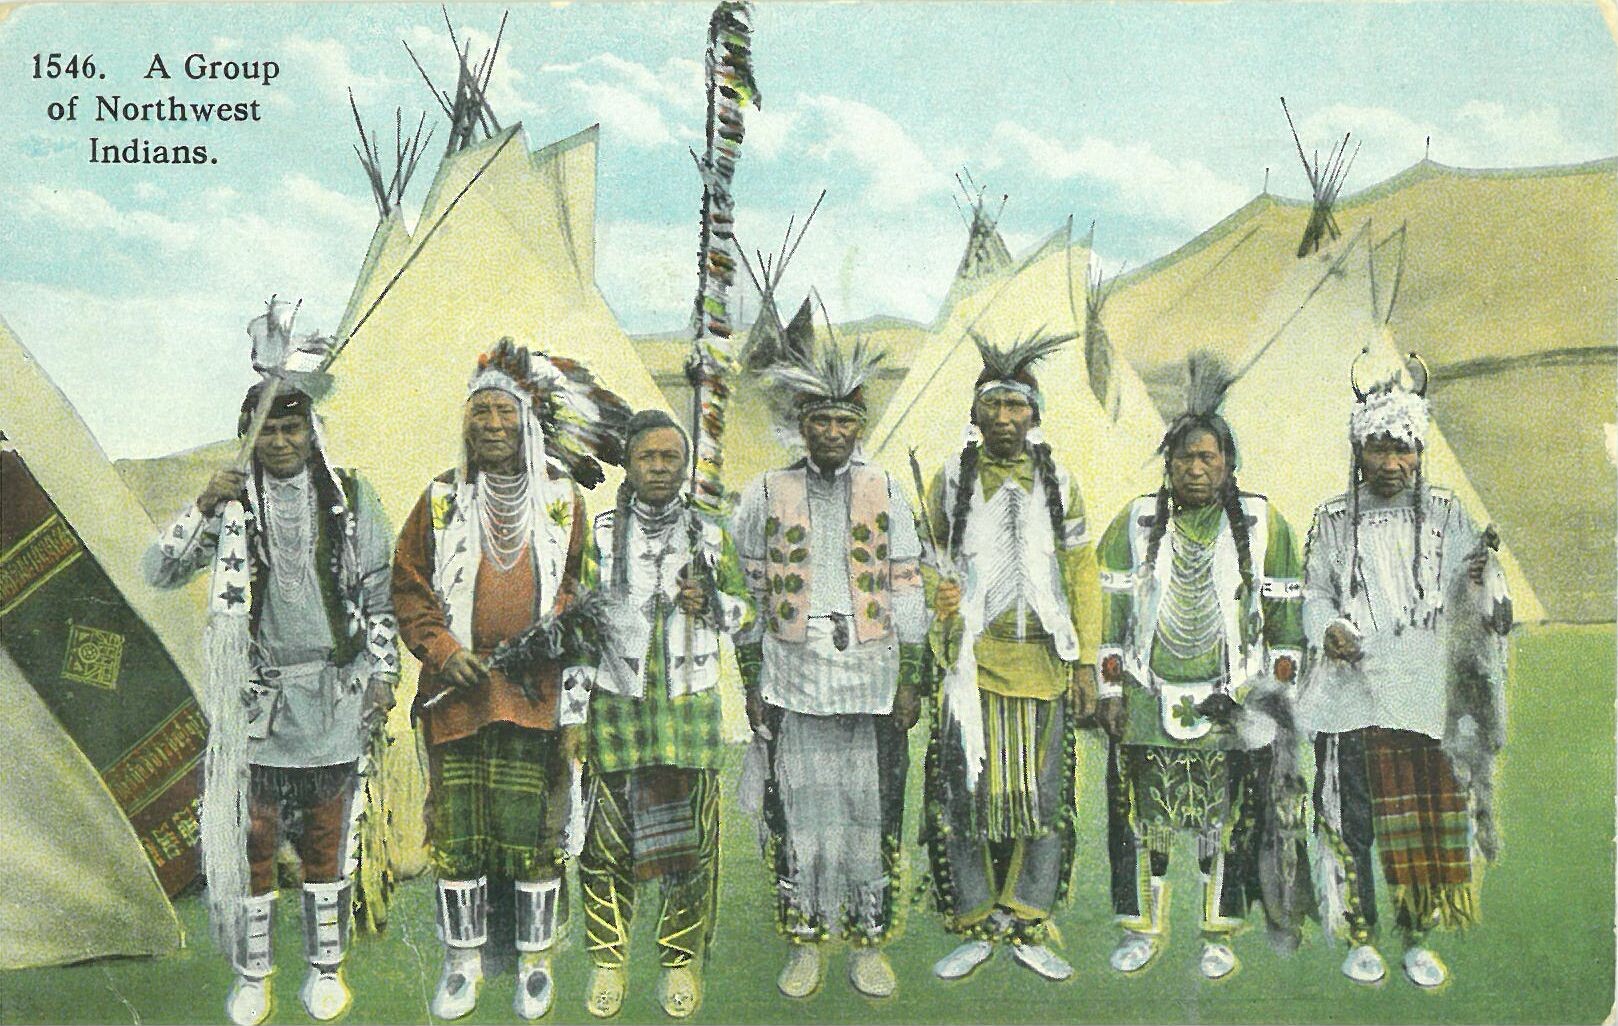 1546. A Group of Northwest Indians (Karl-May-Museum gGmbH RR-R)